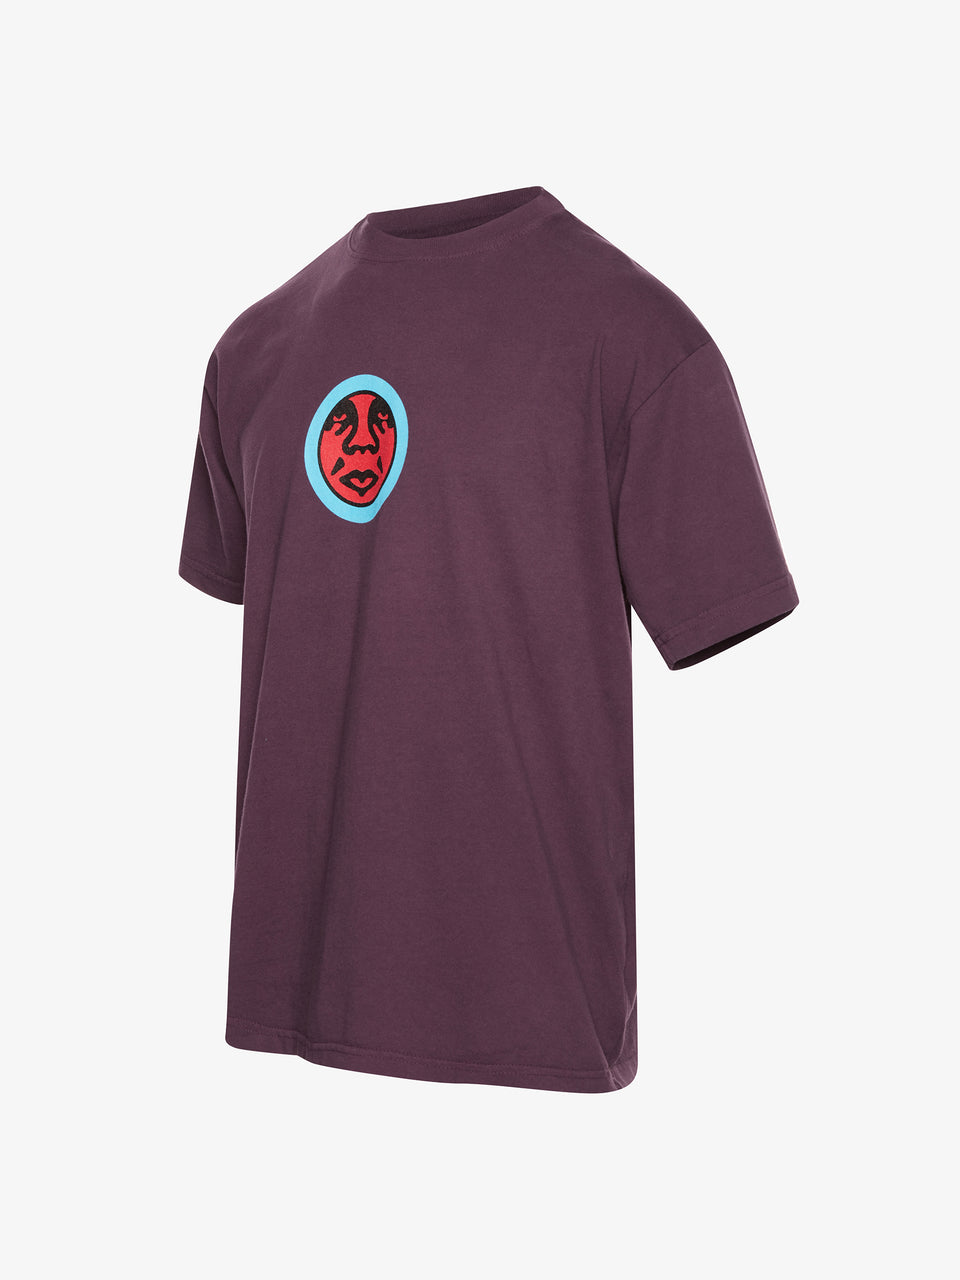 Obey_Icon_Face_Obey_Tee_Blackberry_Wine